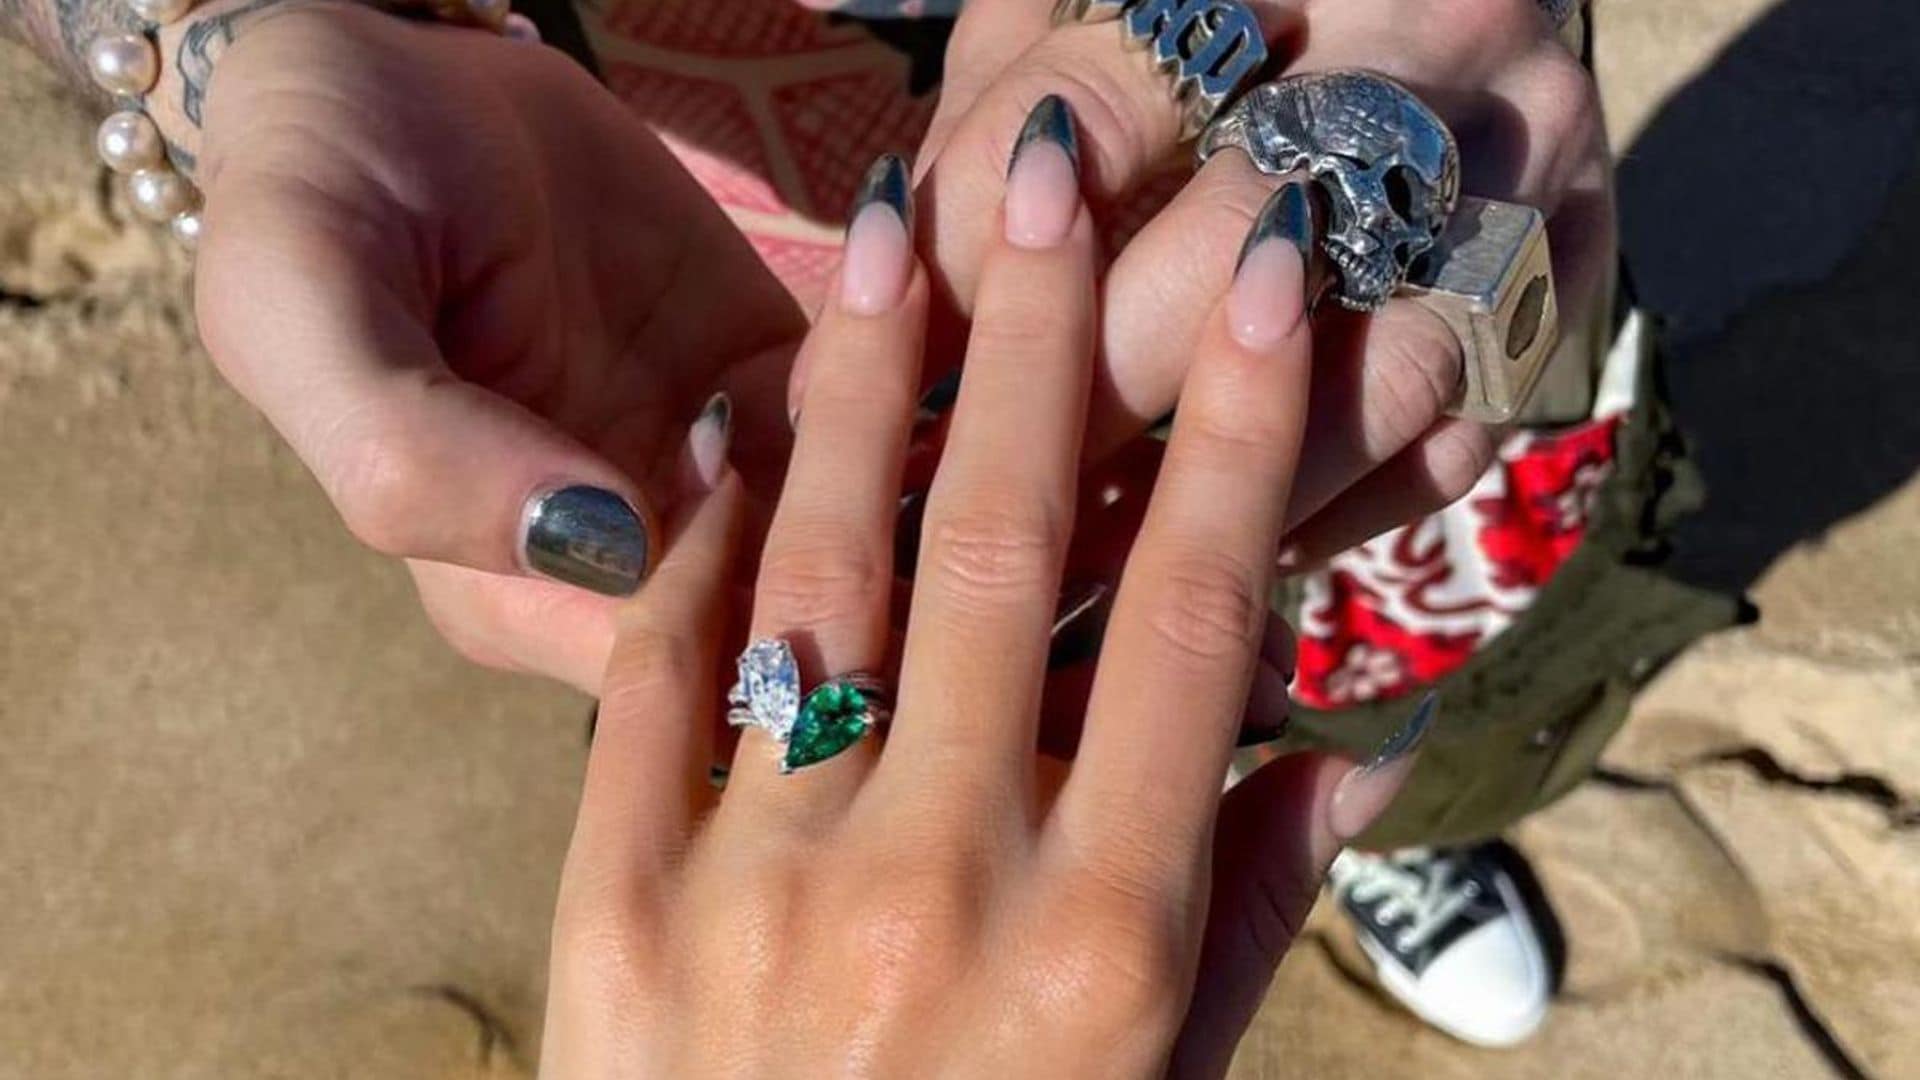 Jewelry expert reveal what Megan Fox’s engagement ring is worth and the meaning behind it